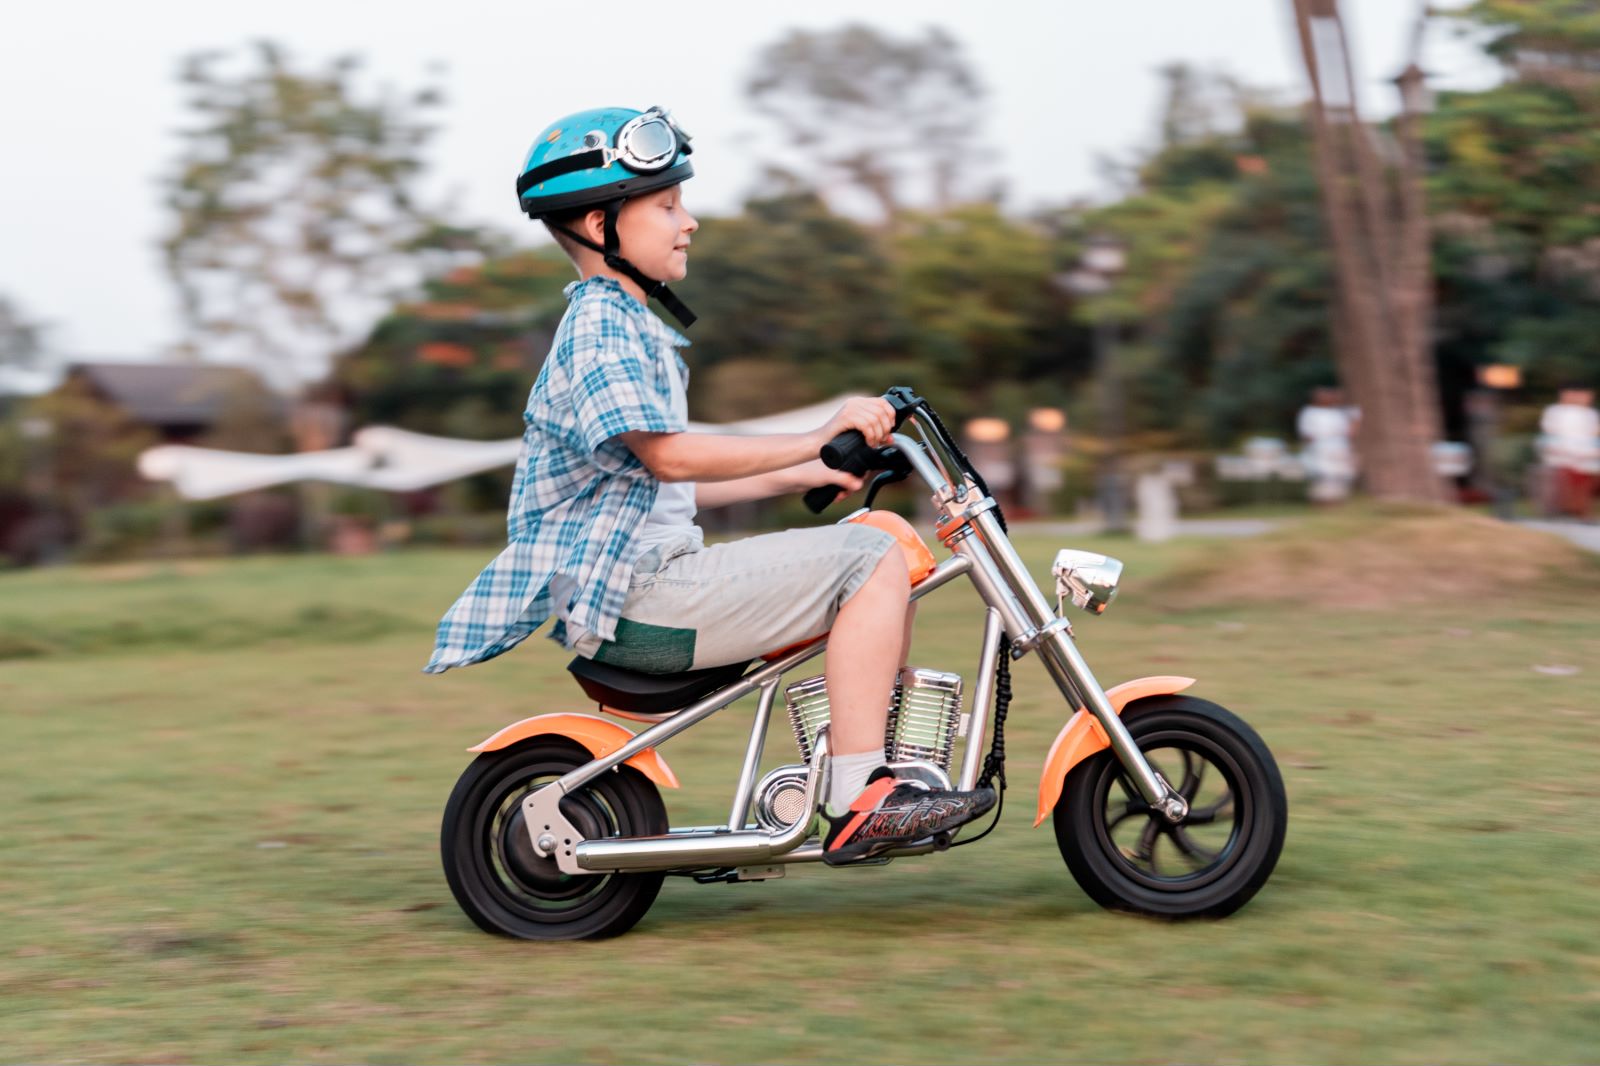 Outdoor Fun Meets Vintage Charm in Mini Motorcycles